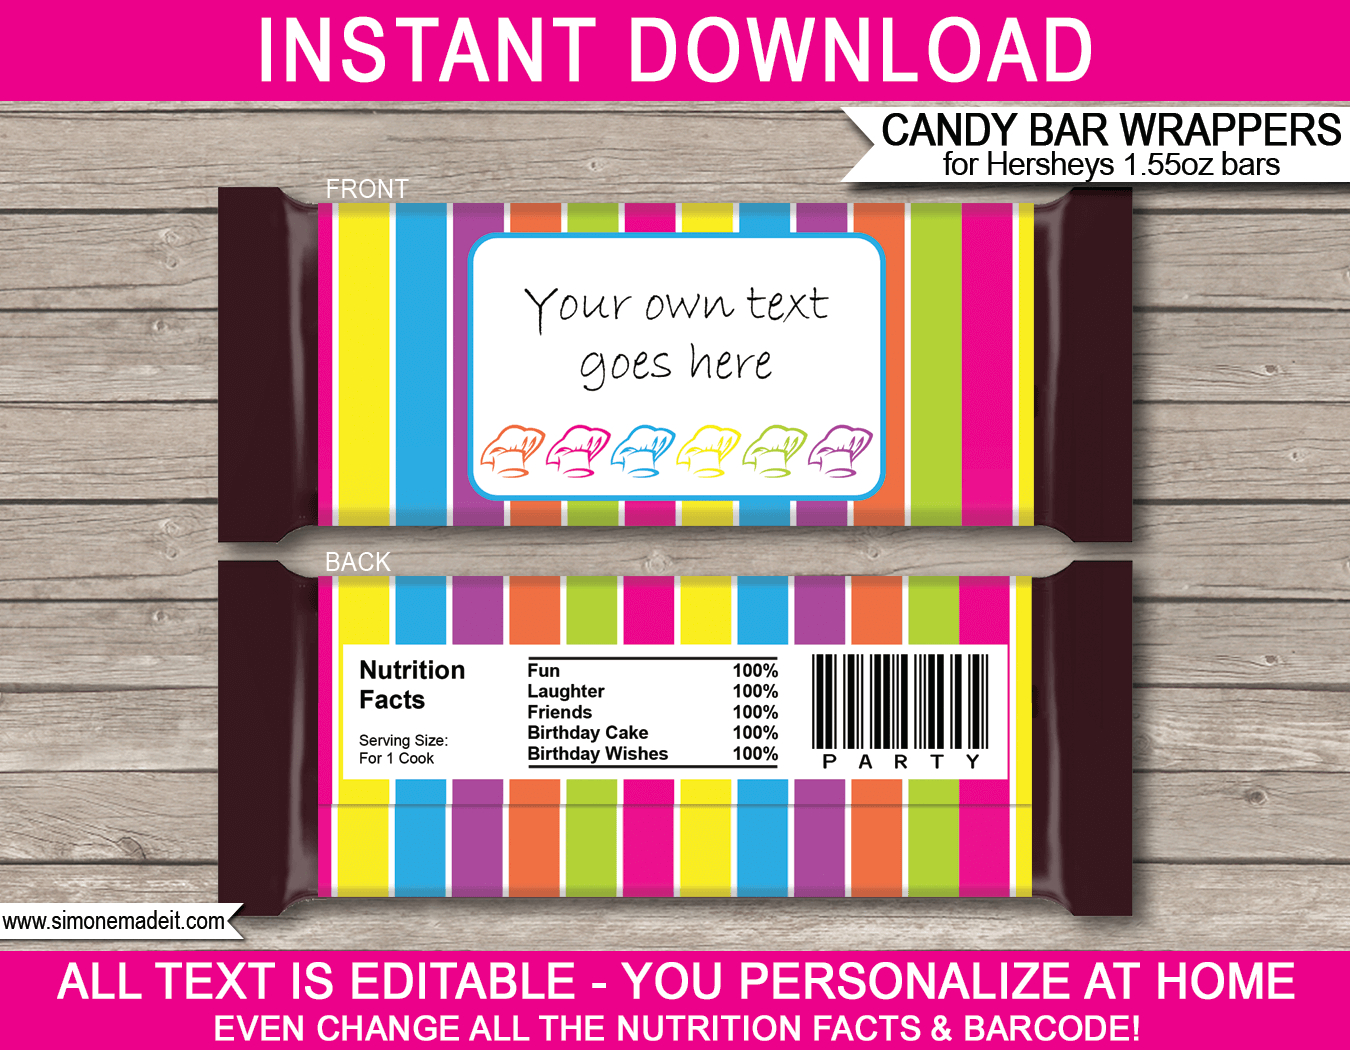 Candy Bar Wrapper Template For Mac - Ameasysite Inside Candy Bar Wrapper Template For Word